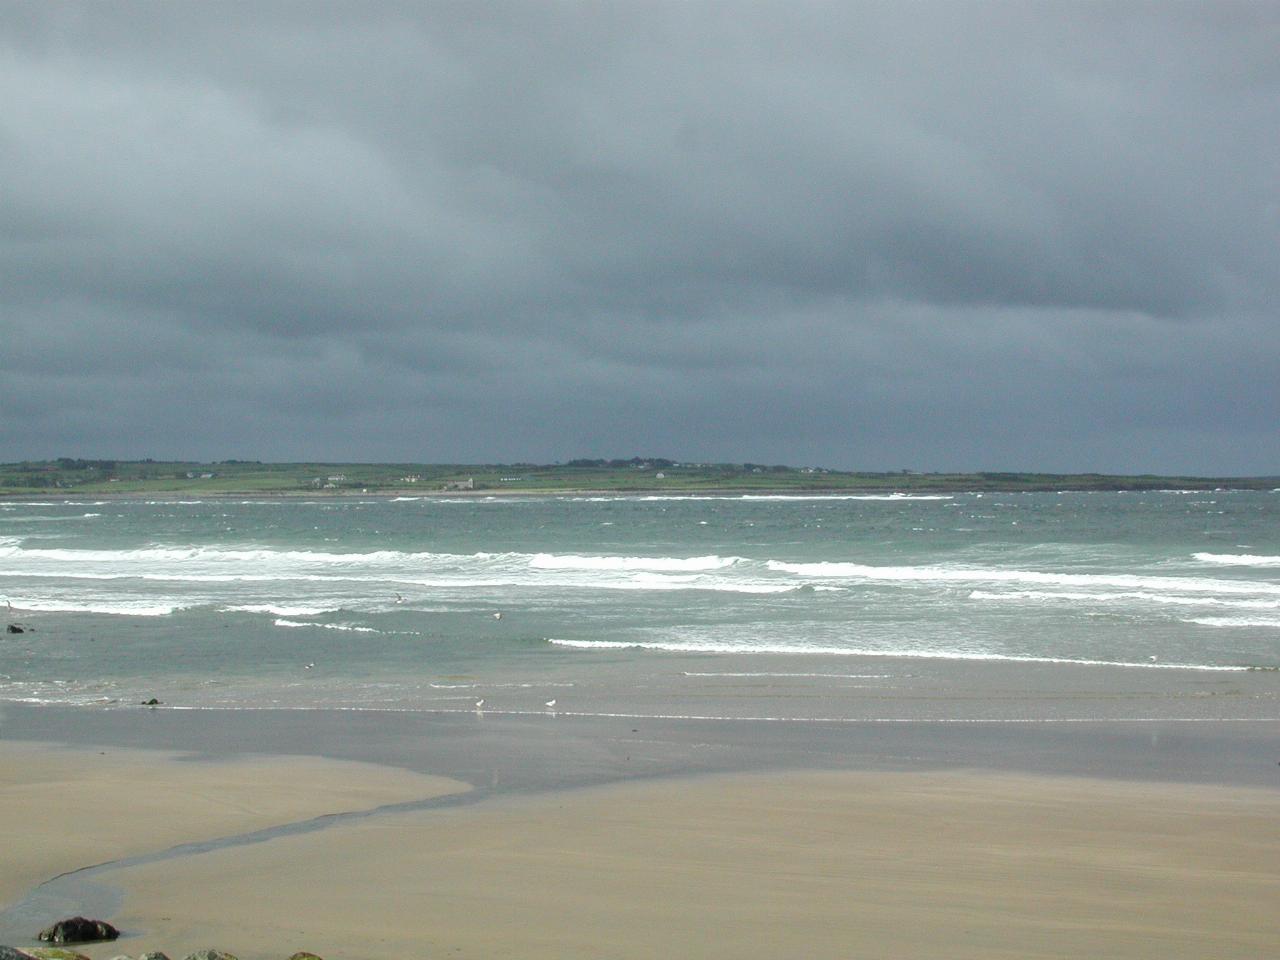 Looking across the entrance of Ballysadare Bay from Standhill